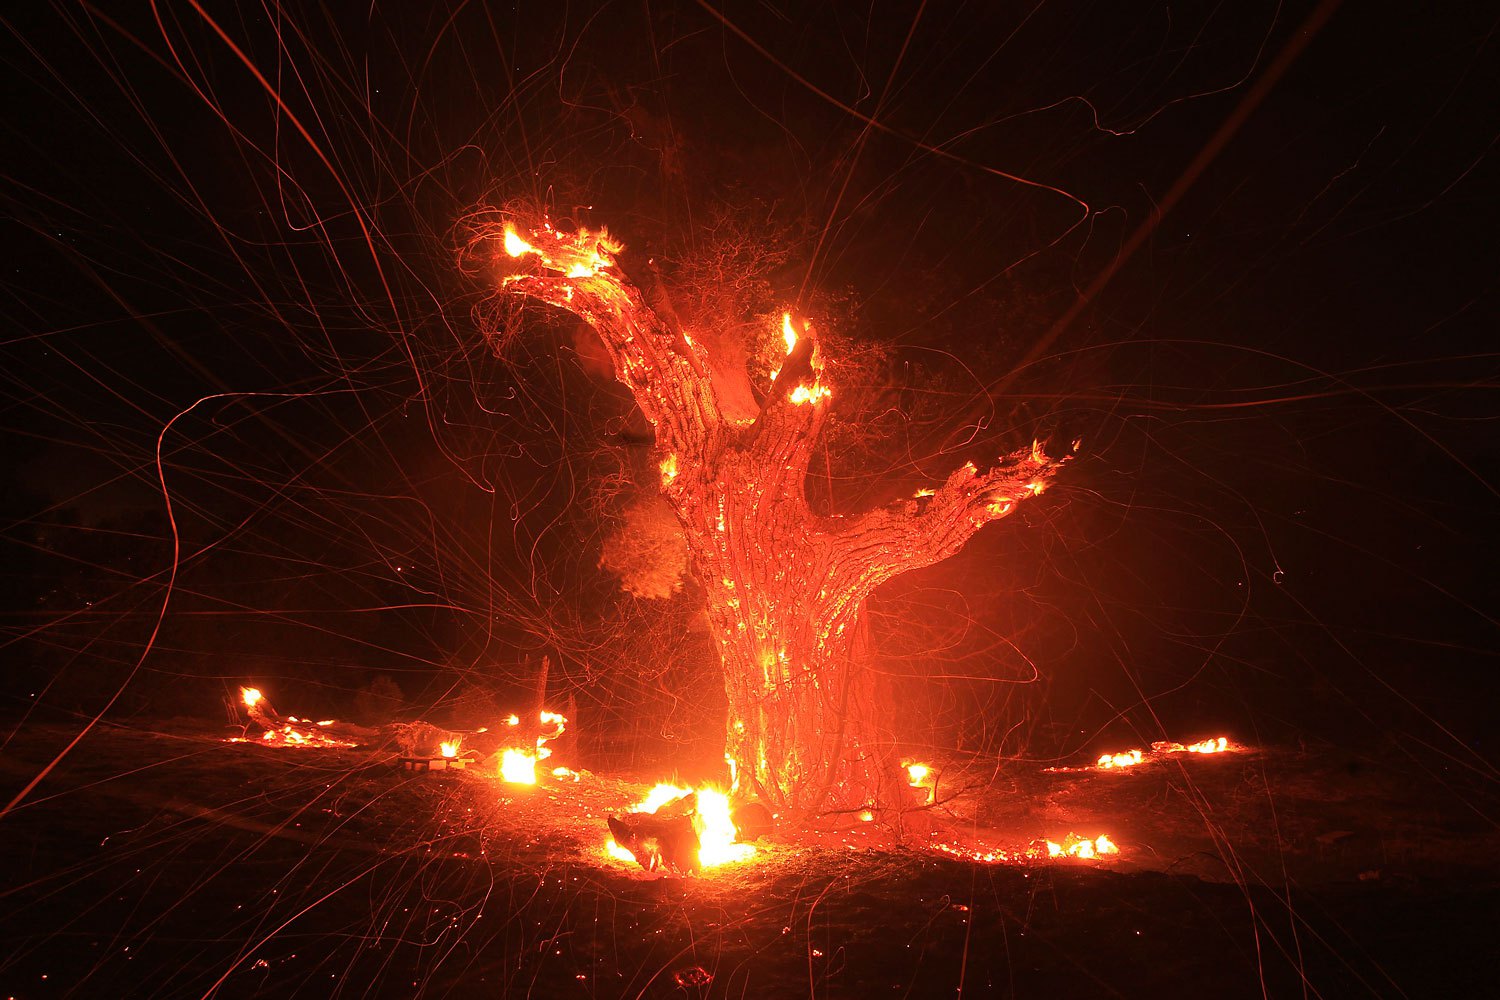 Wind-blown embers fly from an ancient oak tree that burned in the Silver Fire near Banning, Calif. Aug. 7, 2013. Within hours of breaking out about 90 miles outside of Los Angeles, the fire blackened more than 5,000 acres, officials said.